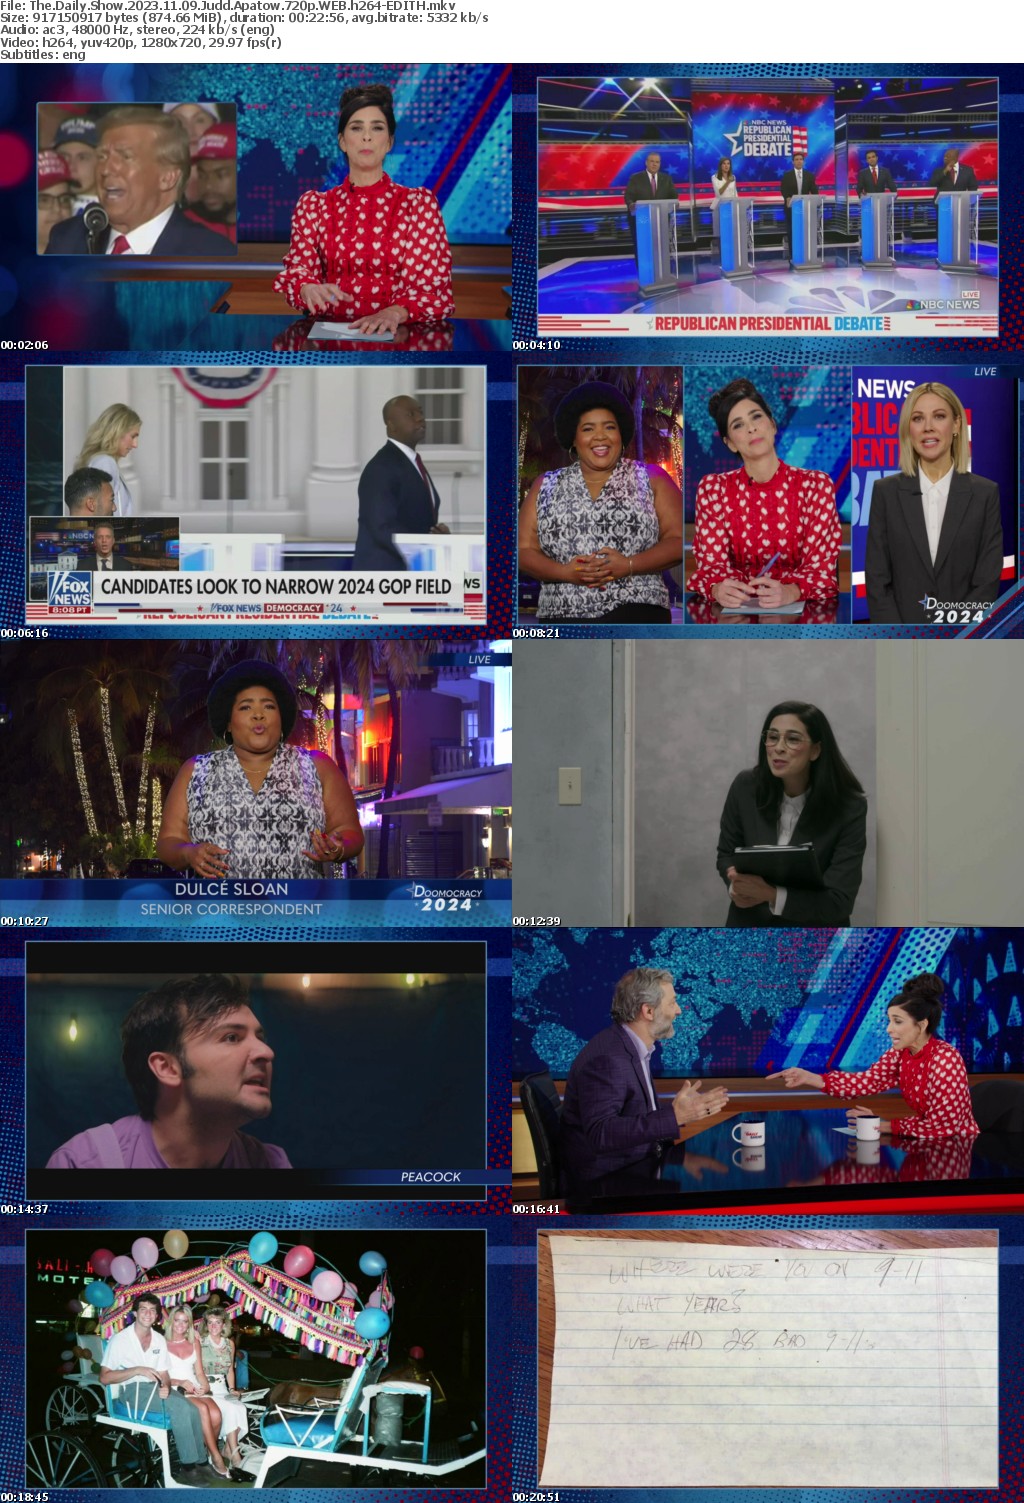 The Daily Show 2023 11 09 Judd Apatow 720p WEB h264-EDITH